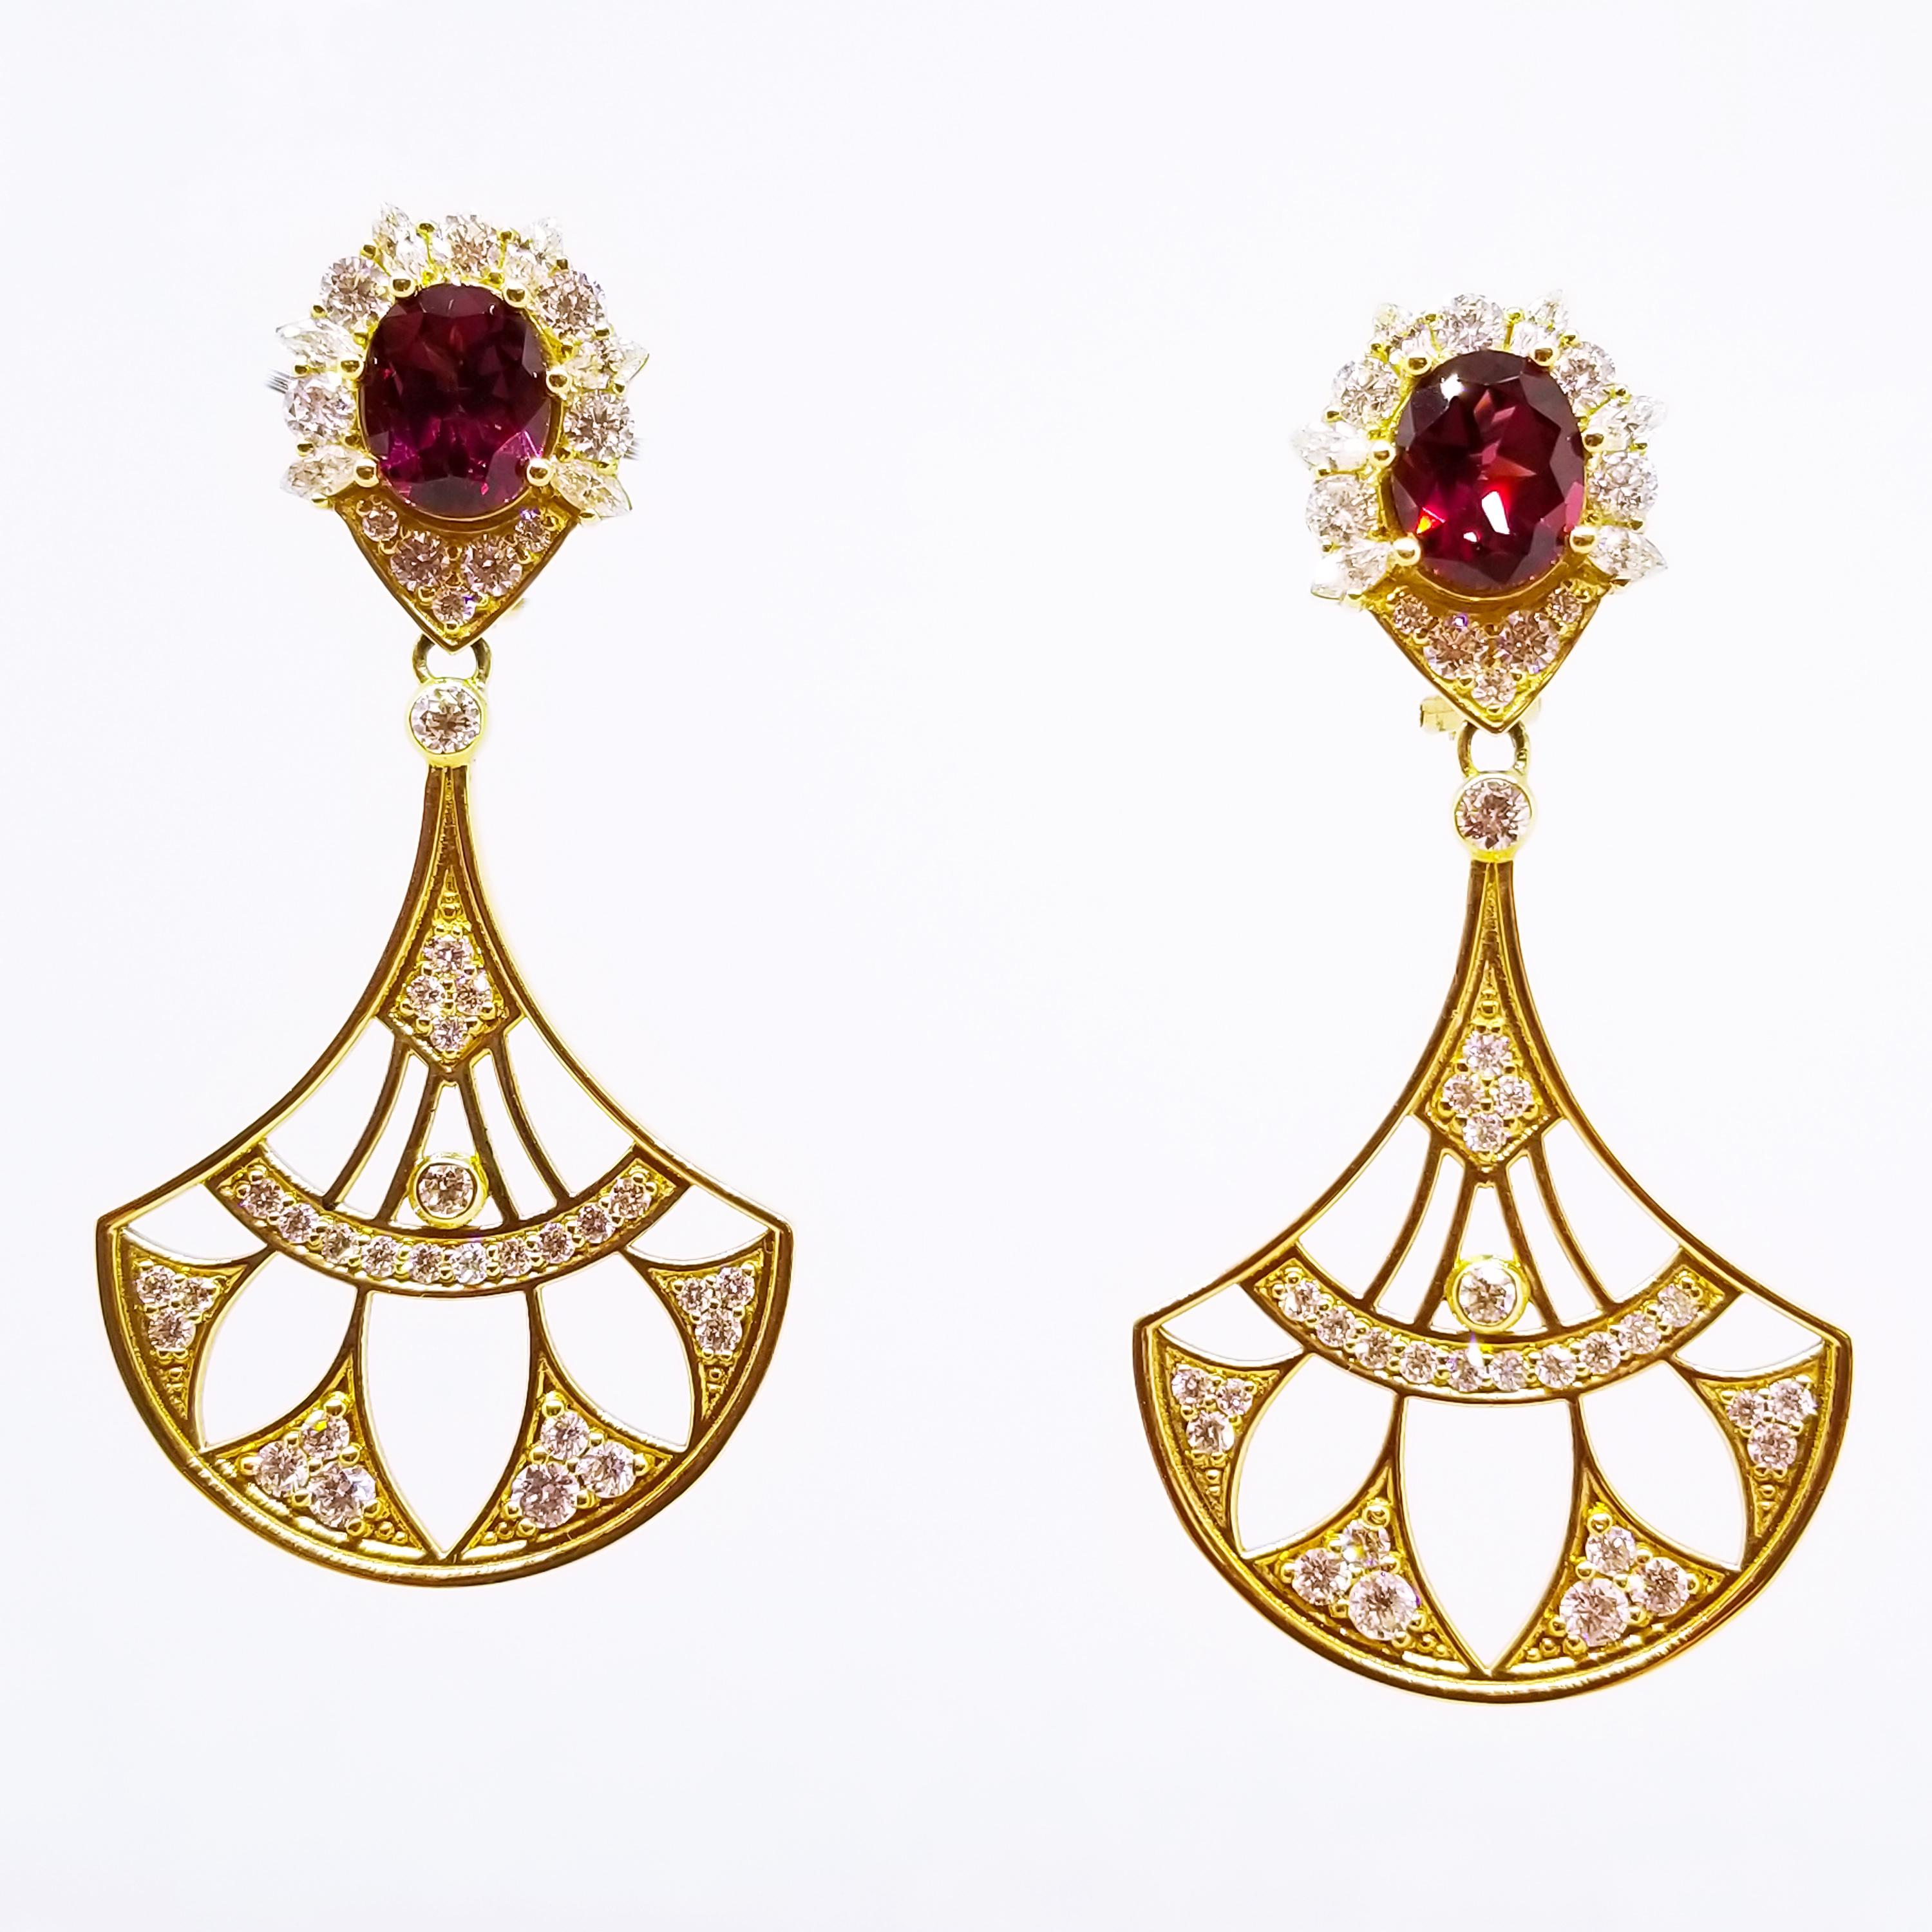 These Long and Elegant Statement Earrings are One of a Kind in 18K Yellow Gold. The Dramatic Earrings feature faceted, Oval Rhodolite Garnets of Intense Red Hue and Gem Quality. Each Gemstone measures 10 x 8mm and the two stones combine for a total